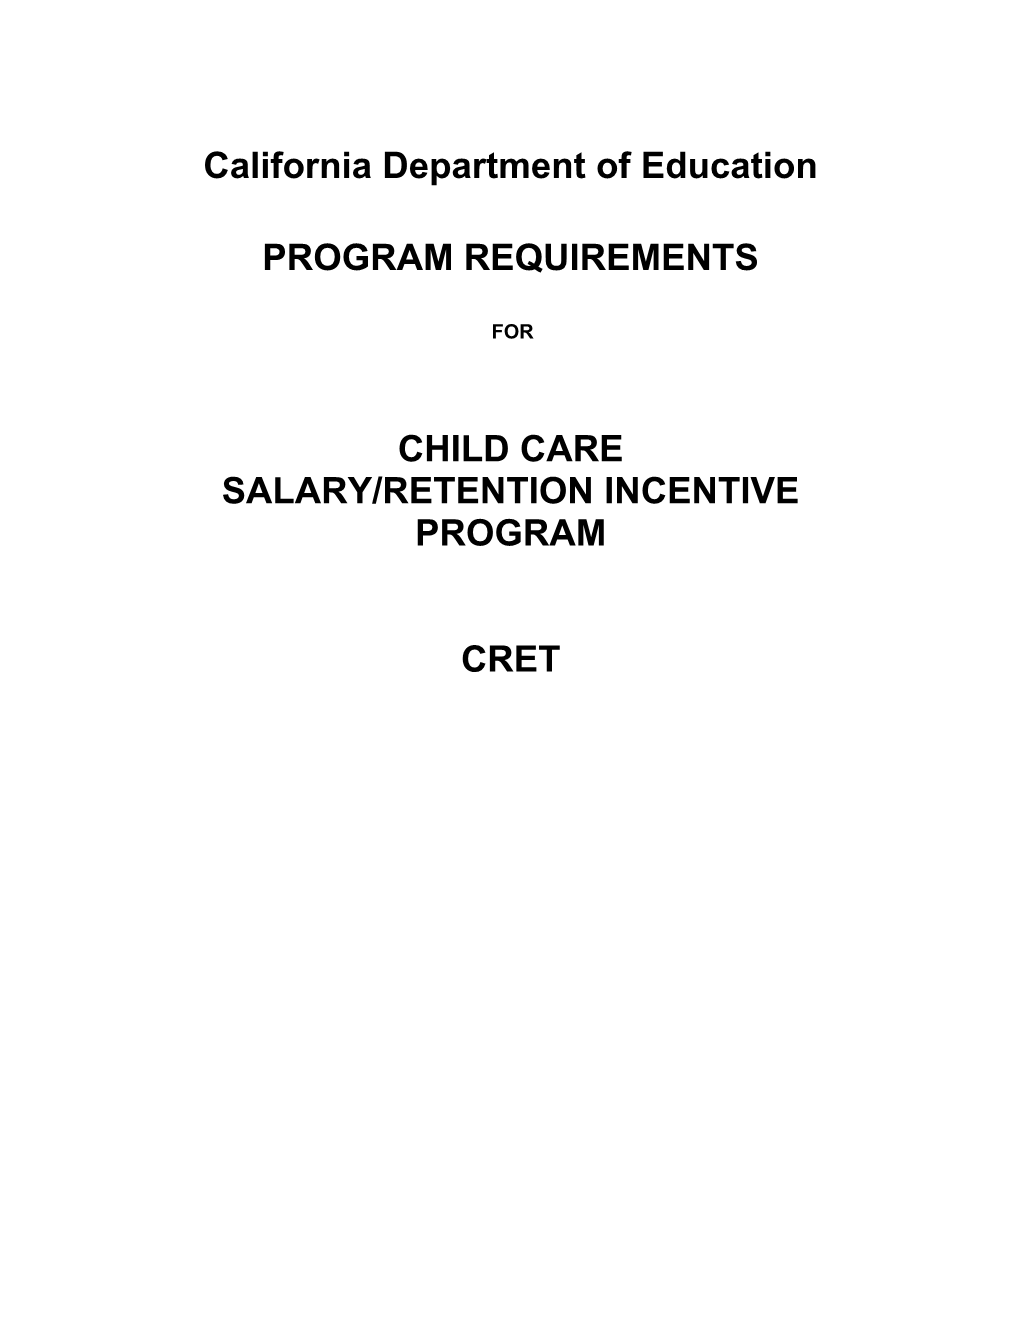 Requirements for Child Care Salary/Retention Incentive Program - Child Dev (CA Dept Of